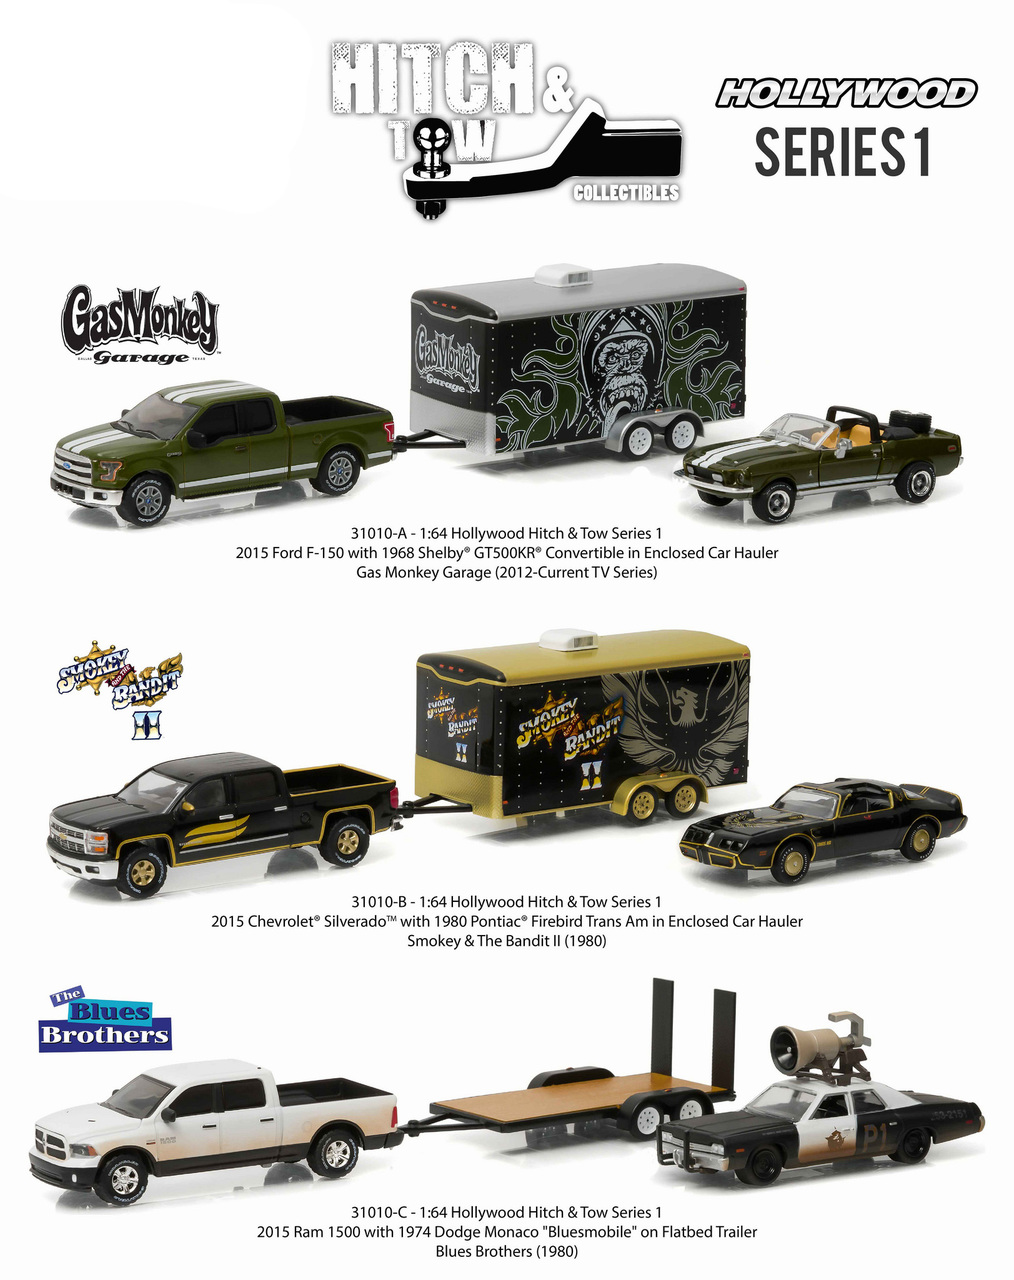 Brand new 1:64 scale car models of Hollywood Hitch & Tow Series 1 Set of 3 die cast car models by Greenlight.Limited Edition.Detailed Interior Exterior.Metal Body.Comes in a blister pack.Officially Licensed Product.Dimensions Approximately L-7 Inches Long. SET INCLUDES:2015 Ford F-150 & 1968 Shelby GT500KR Convertible with Car Hauler - Gas Monkey Garage (2012 Current TV Series)2015 Chevrolet Silverado & 1980 Pontiac Trans Am with Car Hauler - Smokey and the Bandit II (1980)2015 Ram 1500 & 1974 Dodge Monaco Bluesmobile on Flatbed Trailer- Blues Brothers (1980)